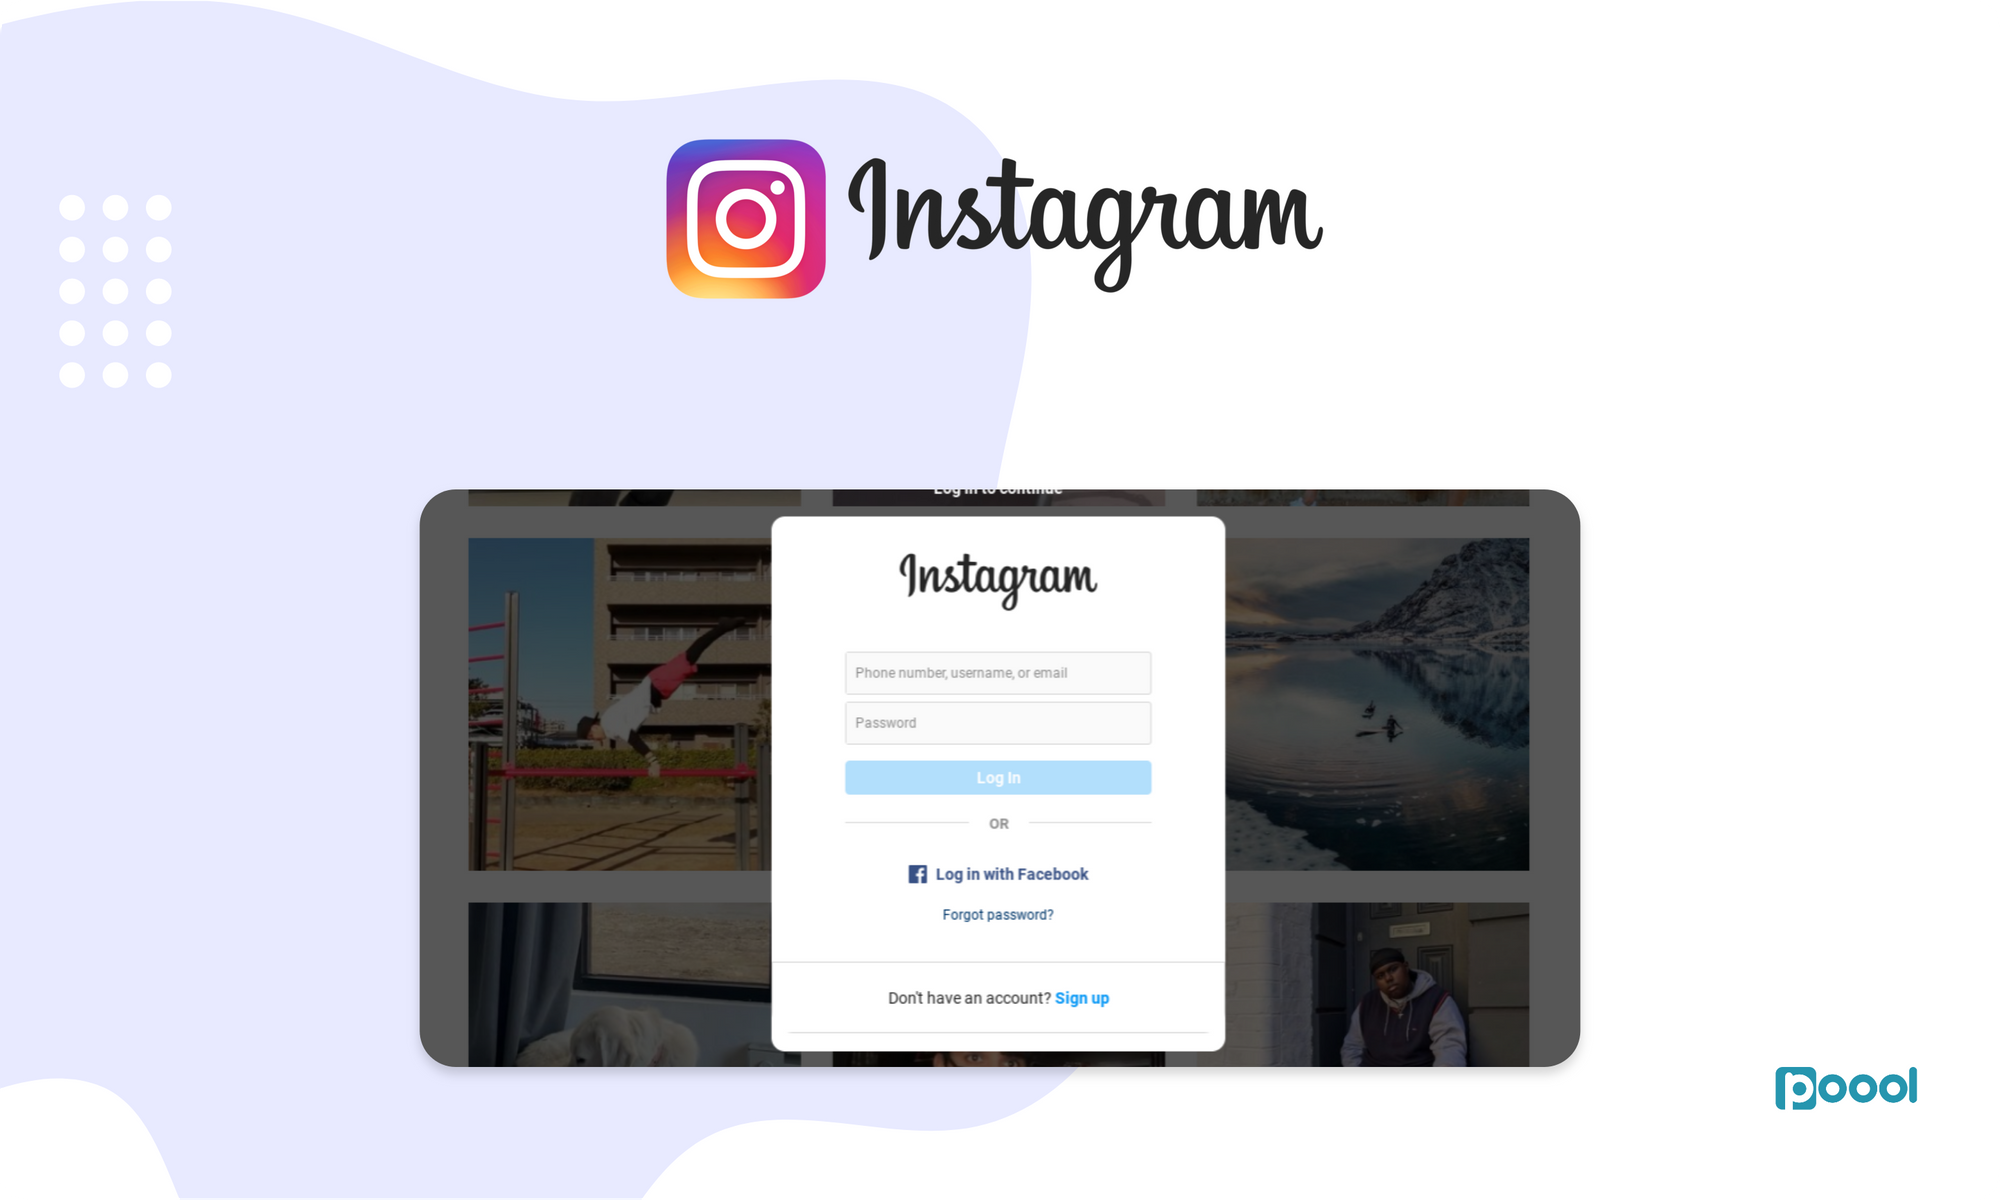 Instagram Registration Wall: From Content, to Registration to Content | Series.